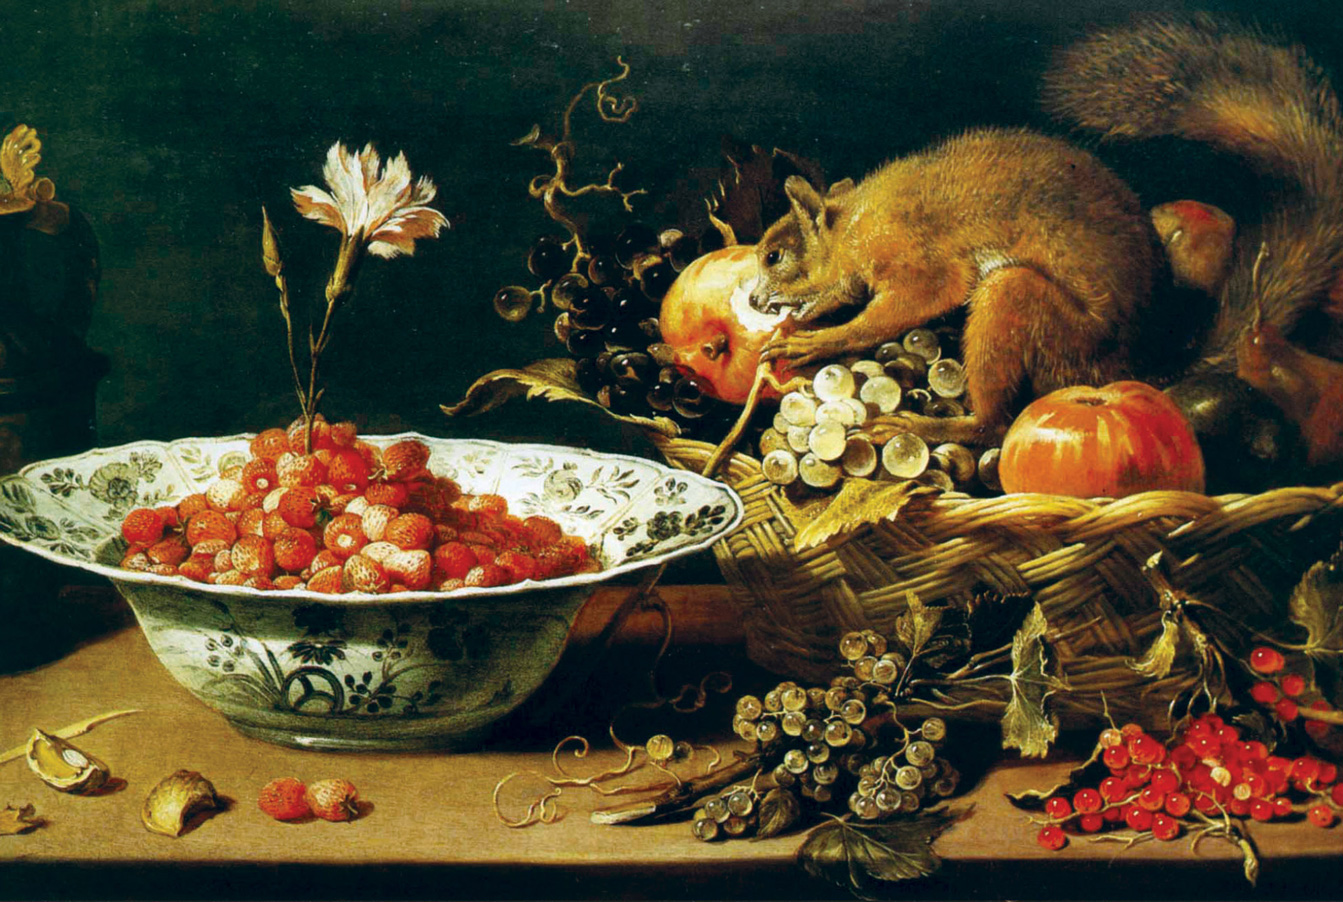 An unfluffy interloper. Frans Snyders’s 1615 Fruit Piece with Squirrel.